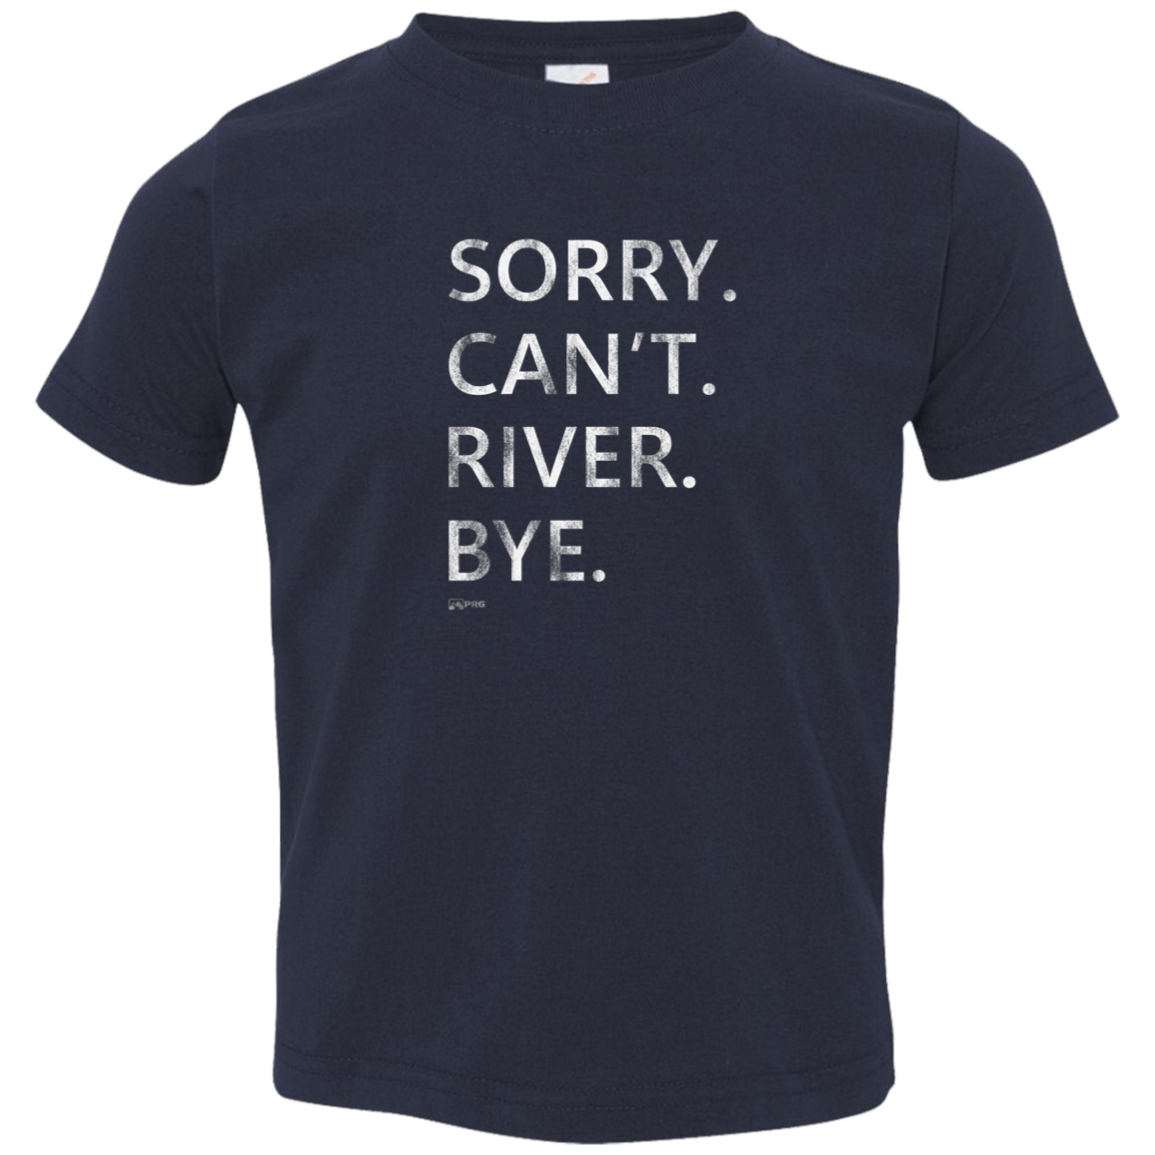 Sorry. Can't. River. Bye. - Toddler Shirt